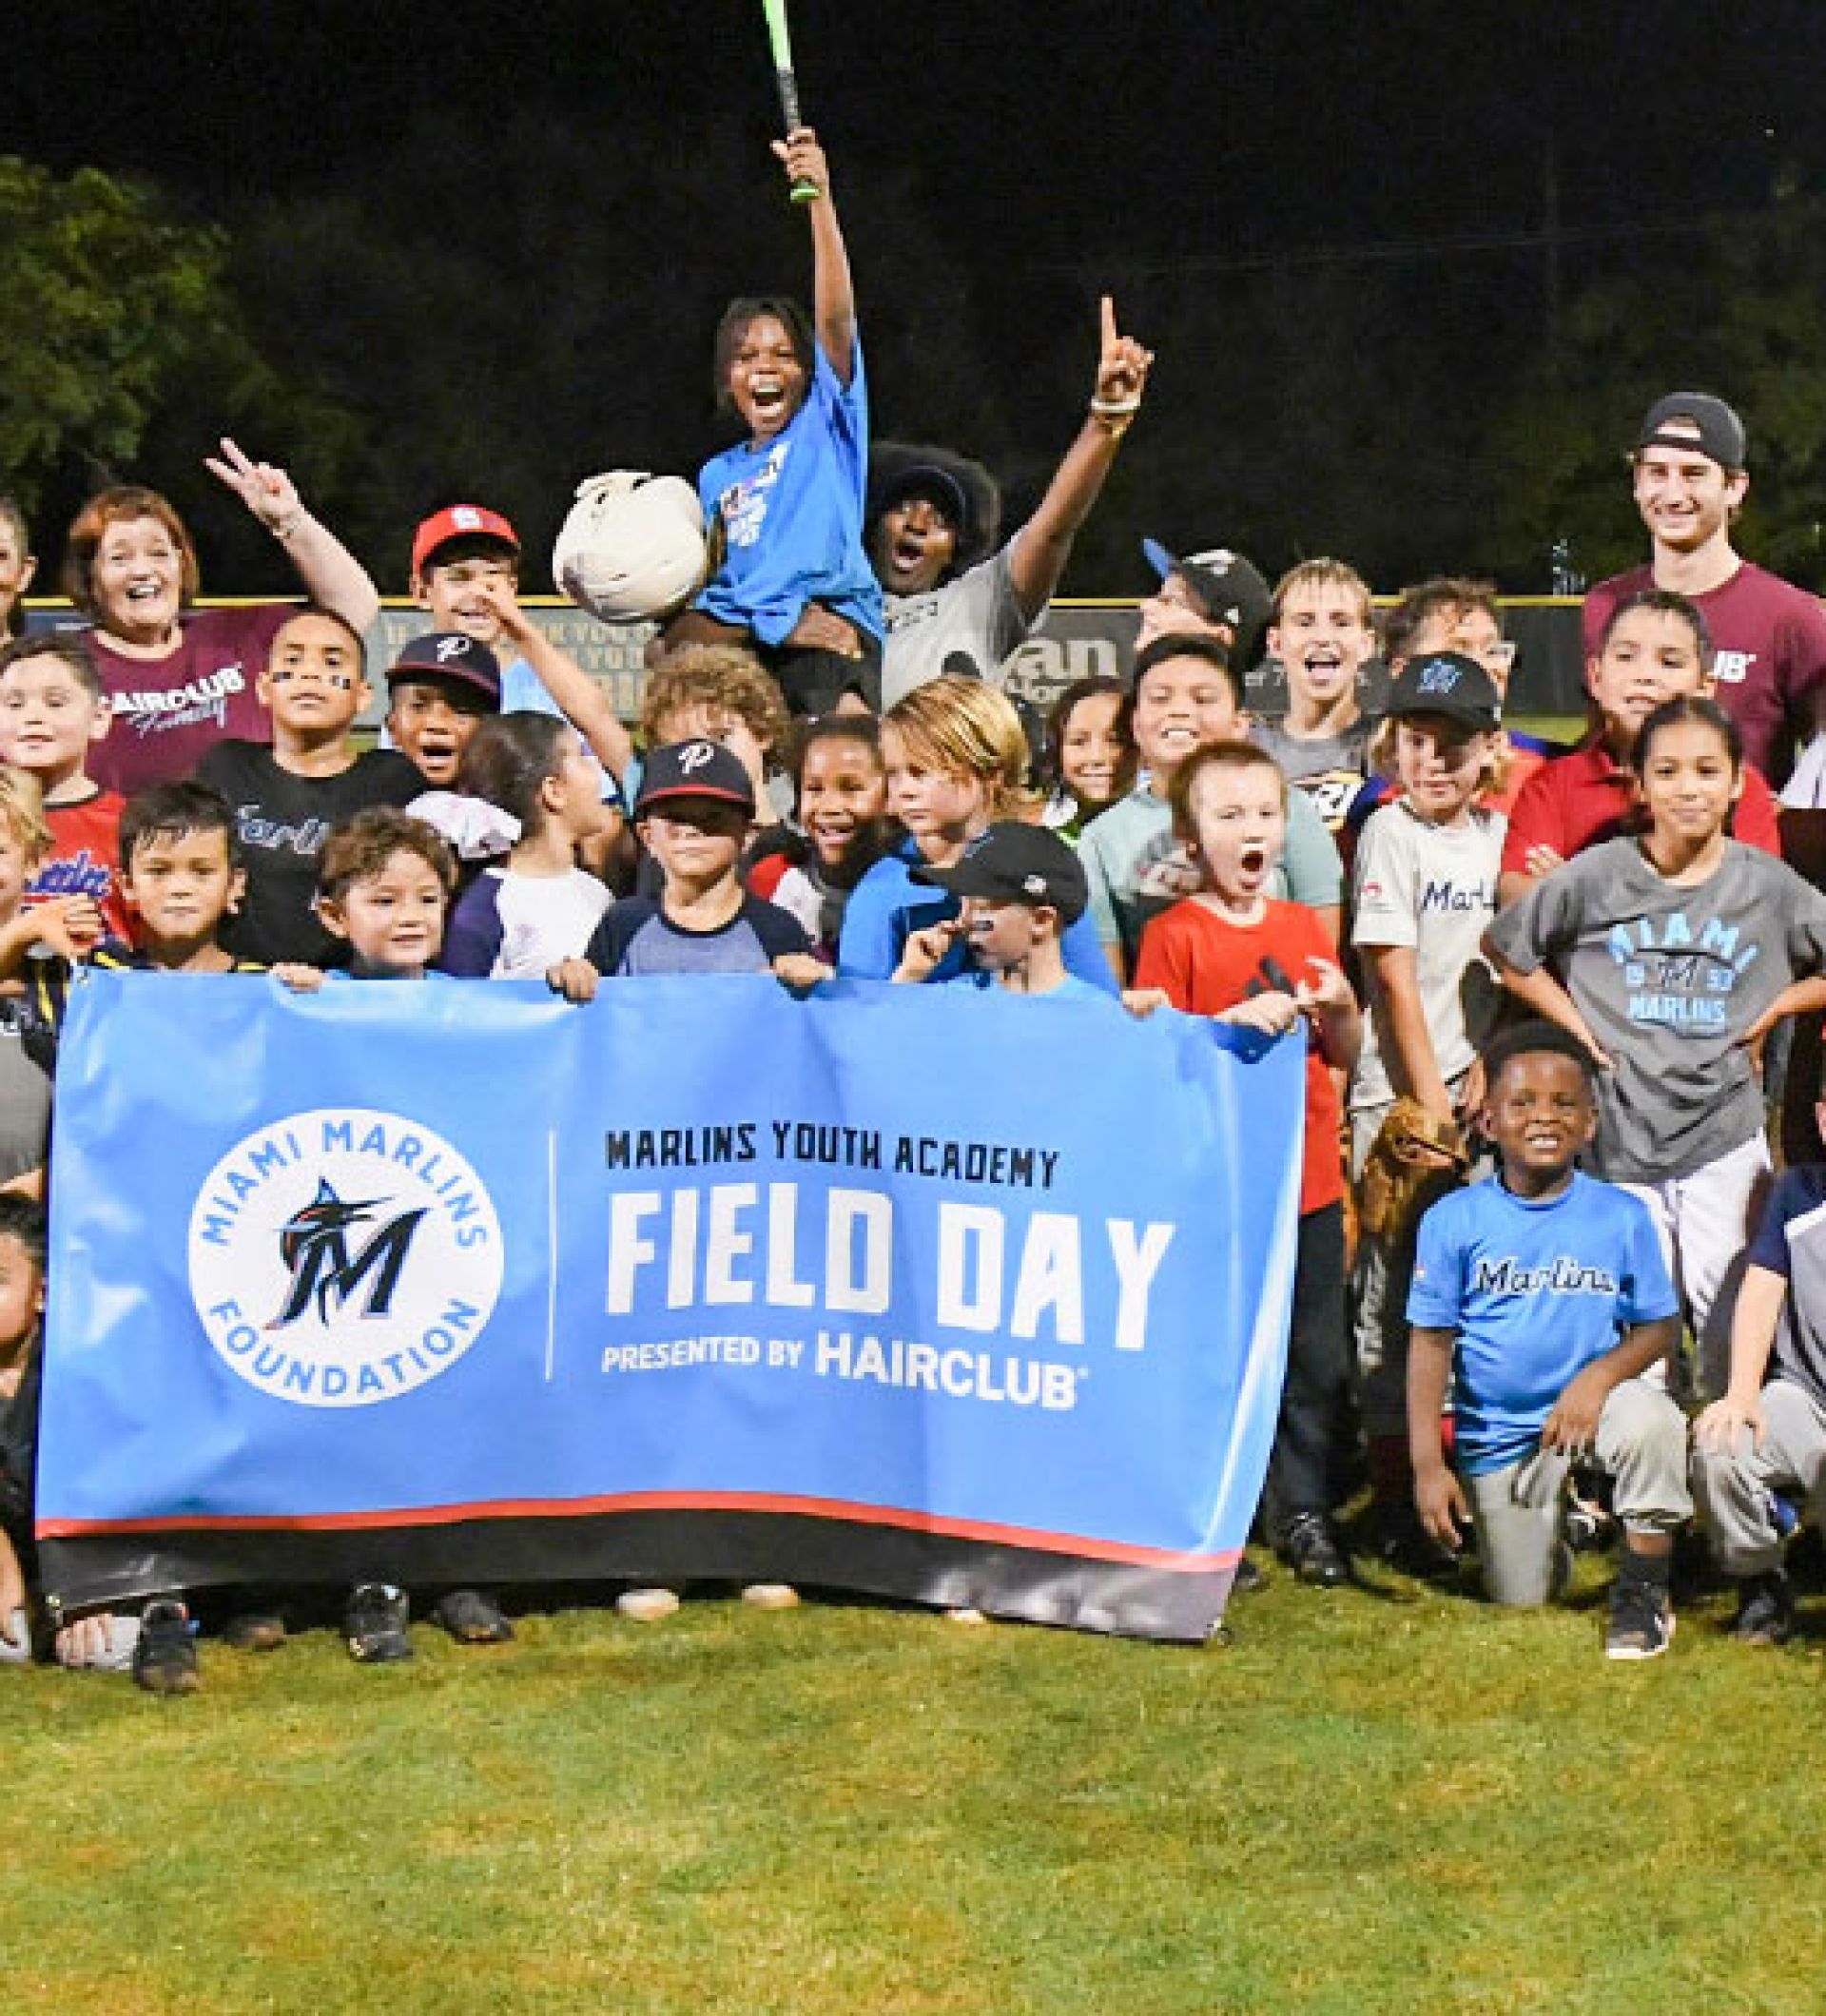 Group image of kids and volunteers on a baseball field